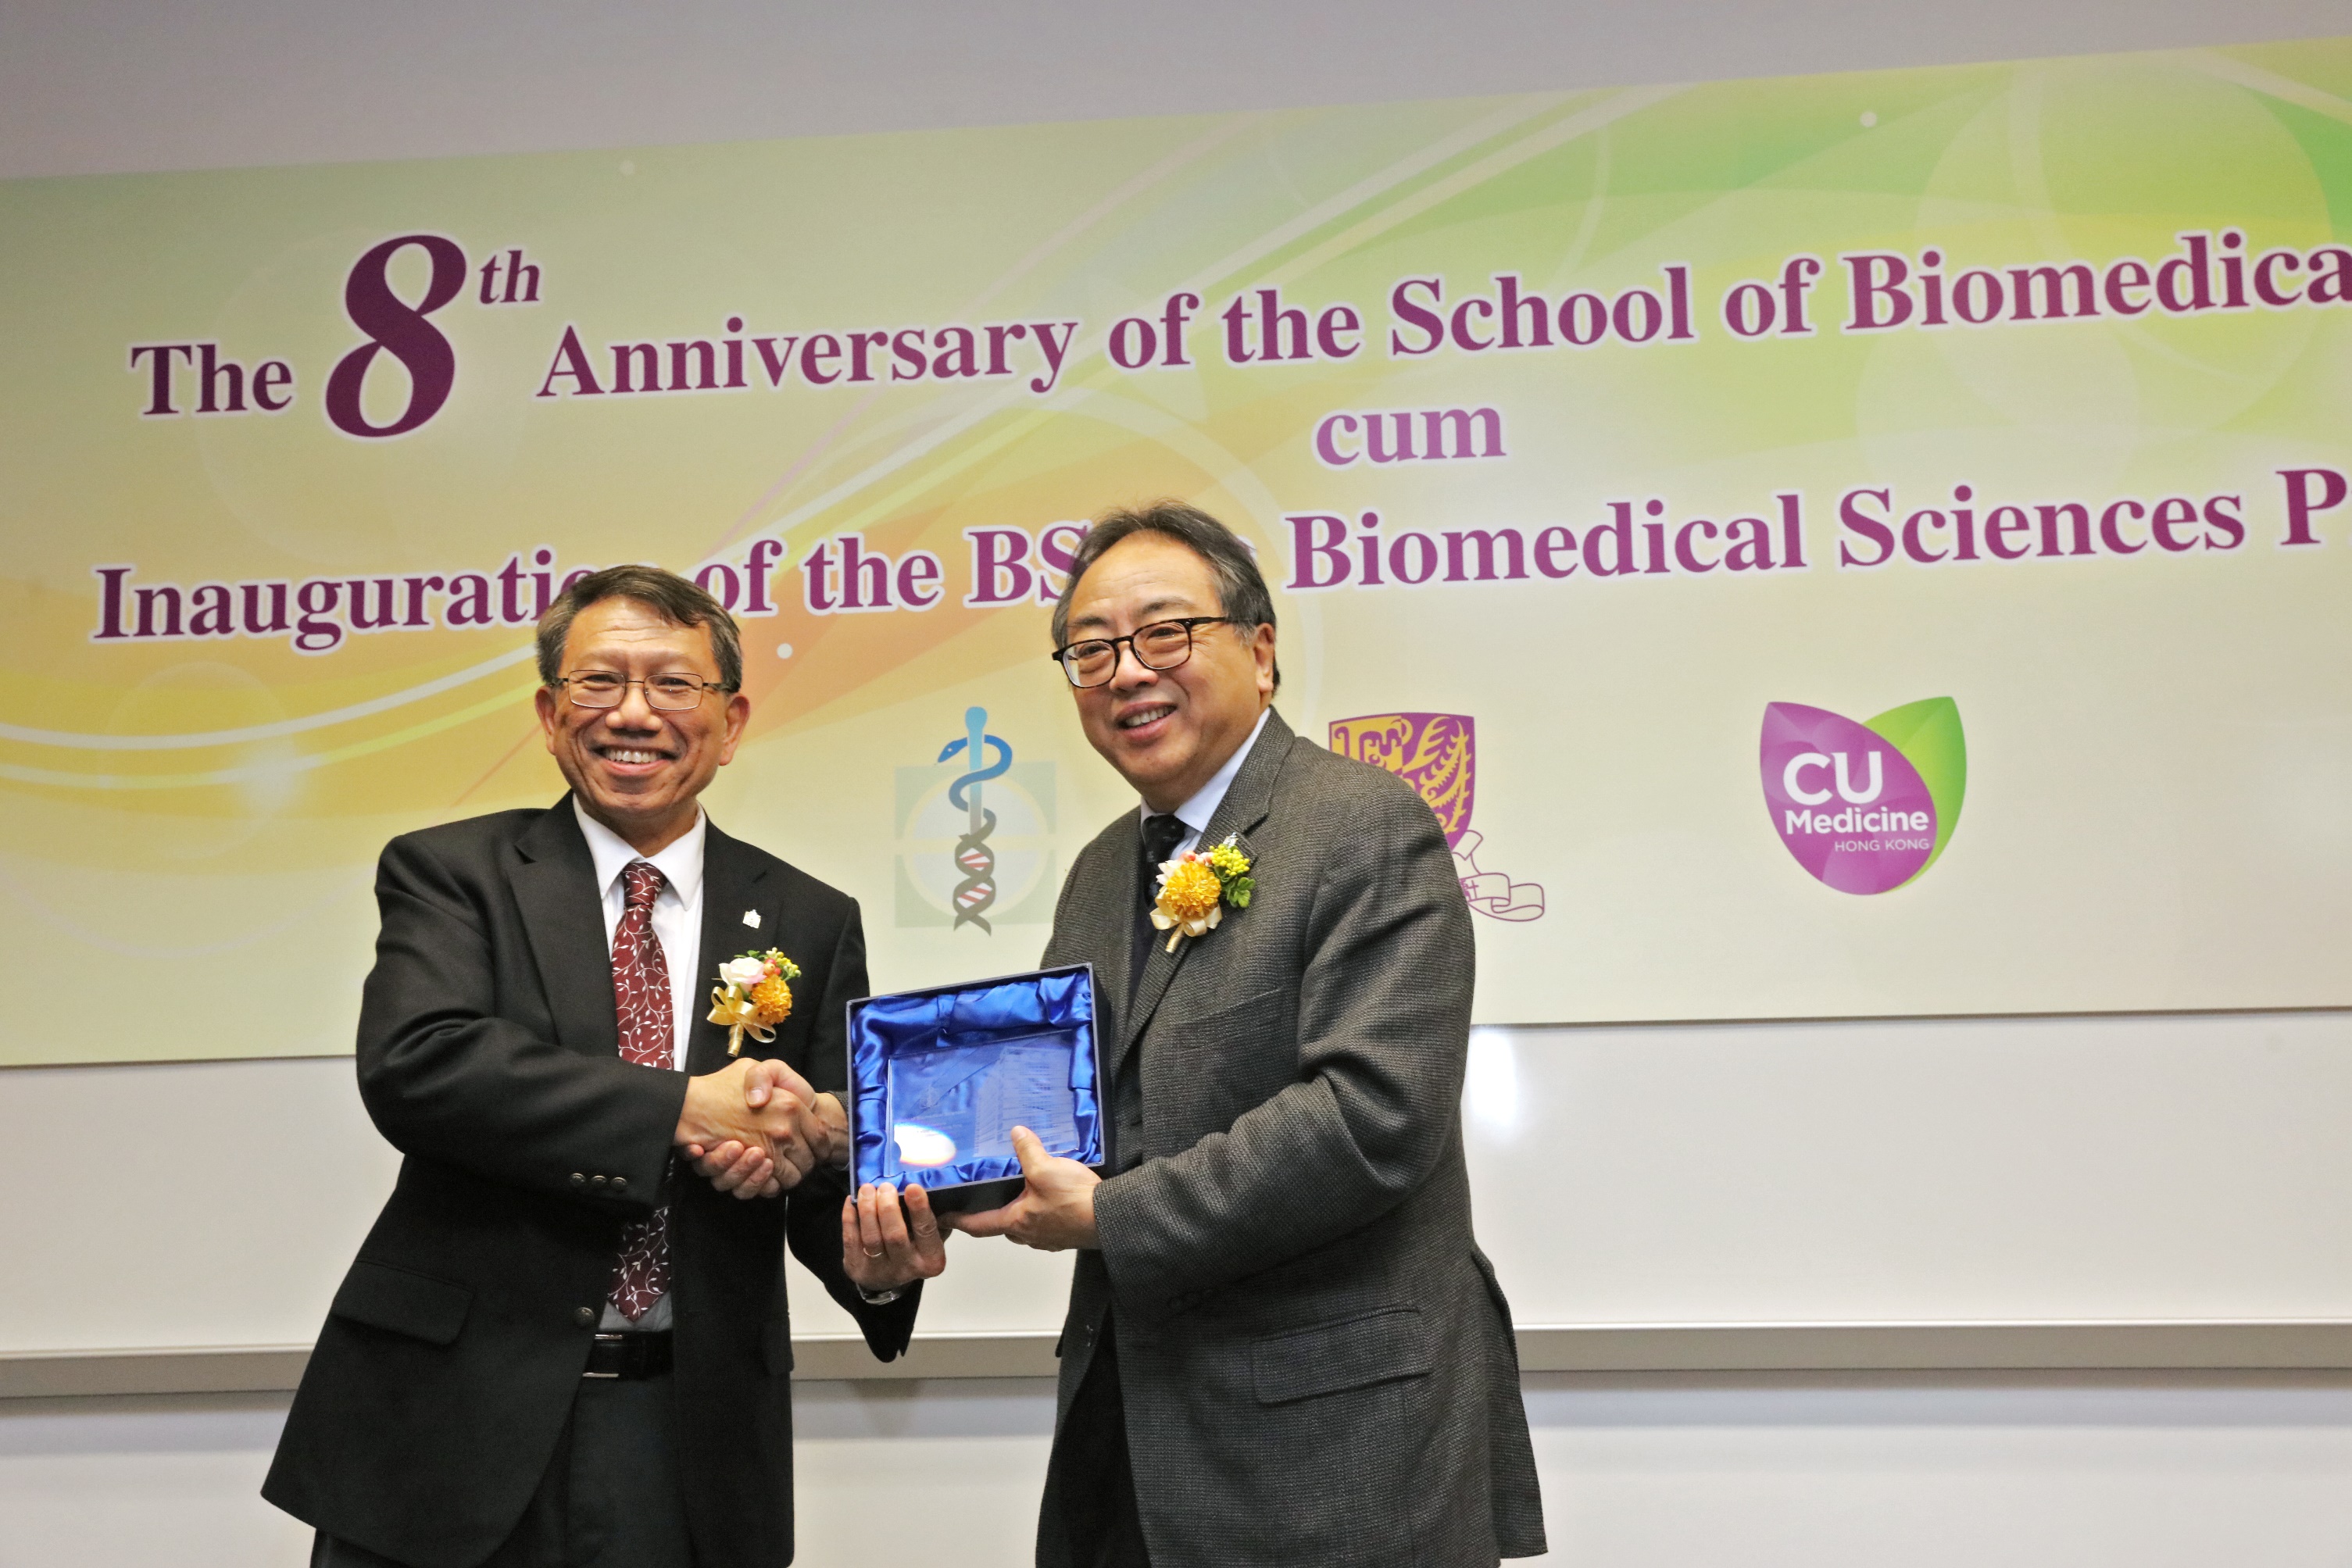  (Right) Prof. Lap-Chee TSUI, Founding President of The Academy of Sciences of Hong Kong, states that building on the solid development, the School of Biomedical Sciences at CUHK has produced the talent and research environment required to build a world-leading biomedical hub and bring Hong Kong to another level of excellence. Featured is Prof. Rocky S. TUAN, Vice-Chancellor and President of CUHK, presenting the souvenir to Prof. Lap-Chee TSUI. 